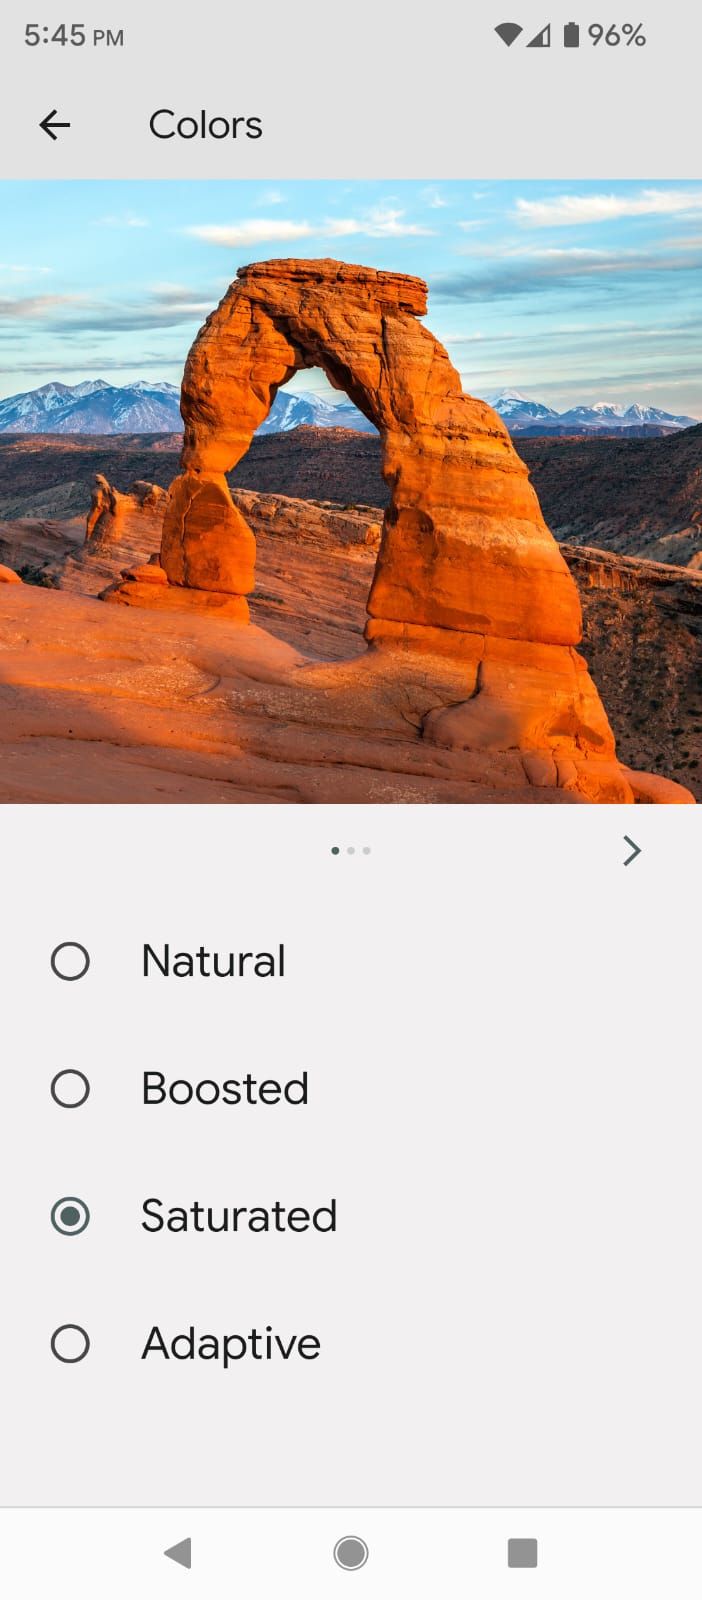 Selecting the Saturated colors option in Android Display Settings